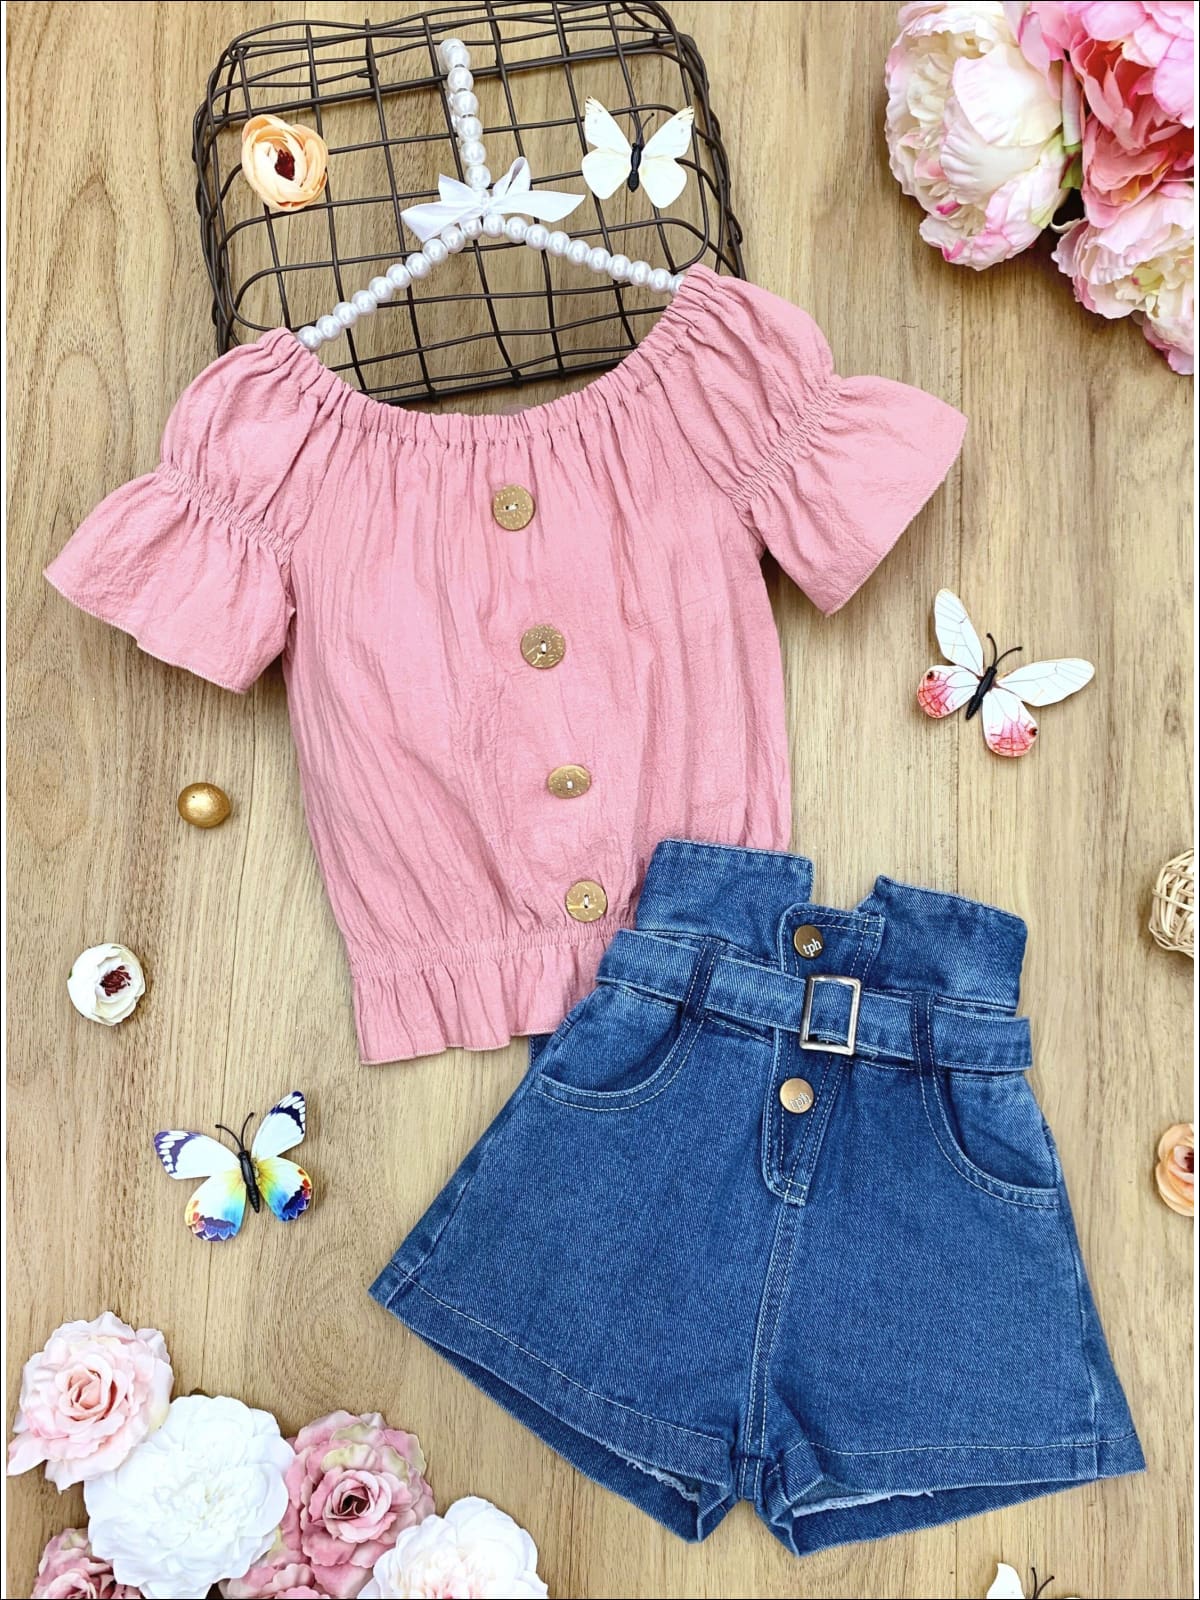 Girls Ruched Button Top and Belted High Waist Denim Shorts Set - Pink / 3T - Girls Spring Casual Set